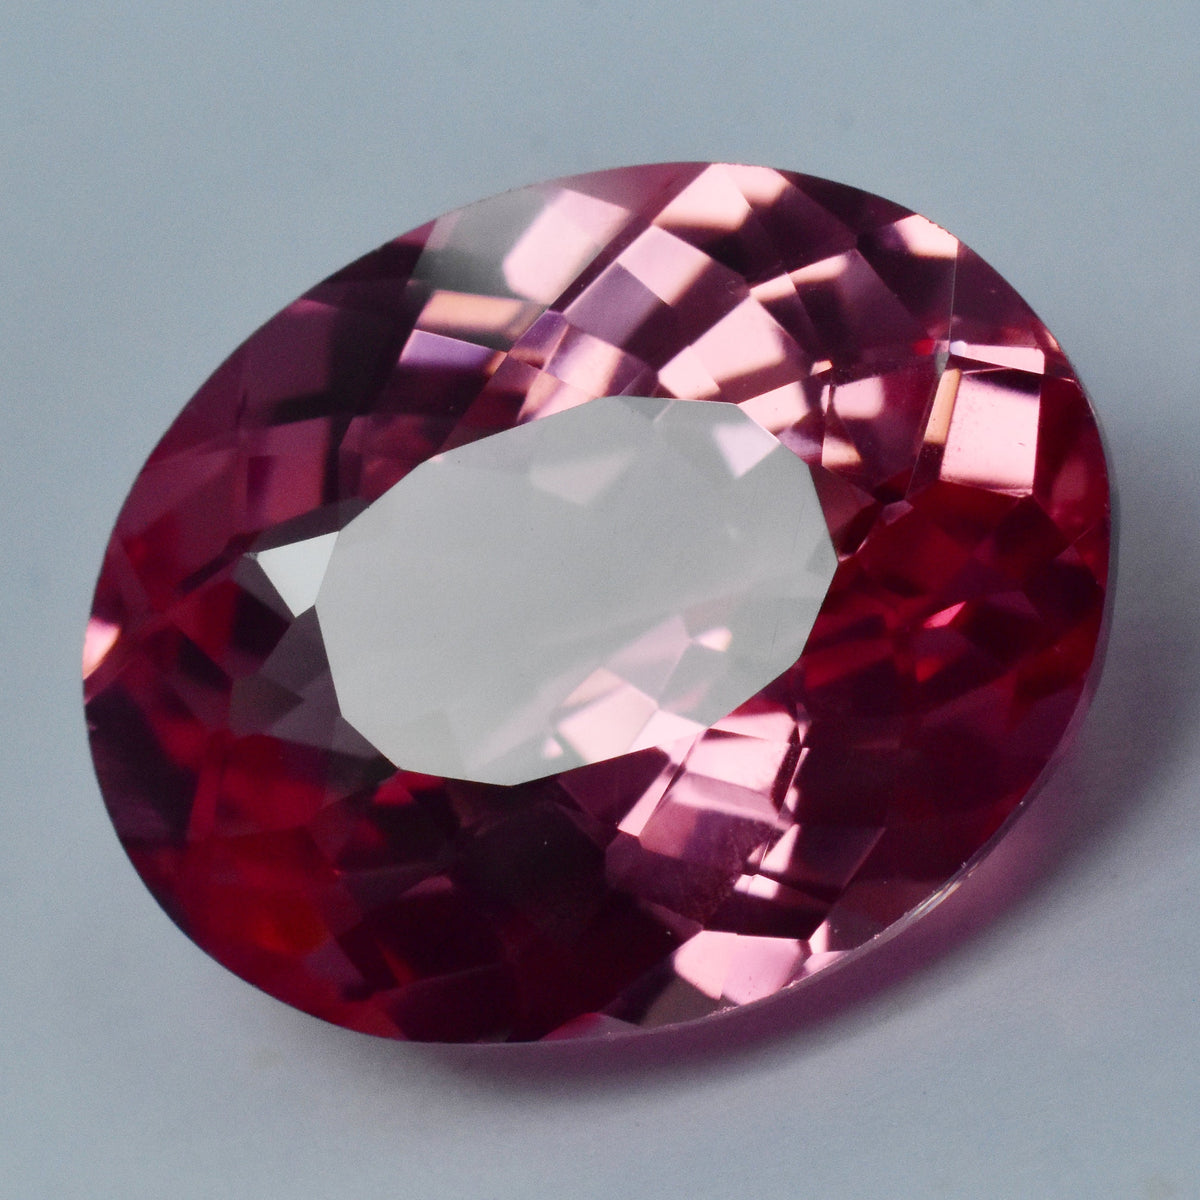 Oval Cut Sapphire Gem , Sapphire Necklace Glorious Gemstone For Jewelry Making 12.32 Carat Padparadscha Sapphire CERTIFIED Natural Oval Shape Loose Gemstone